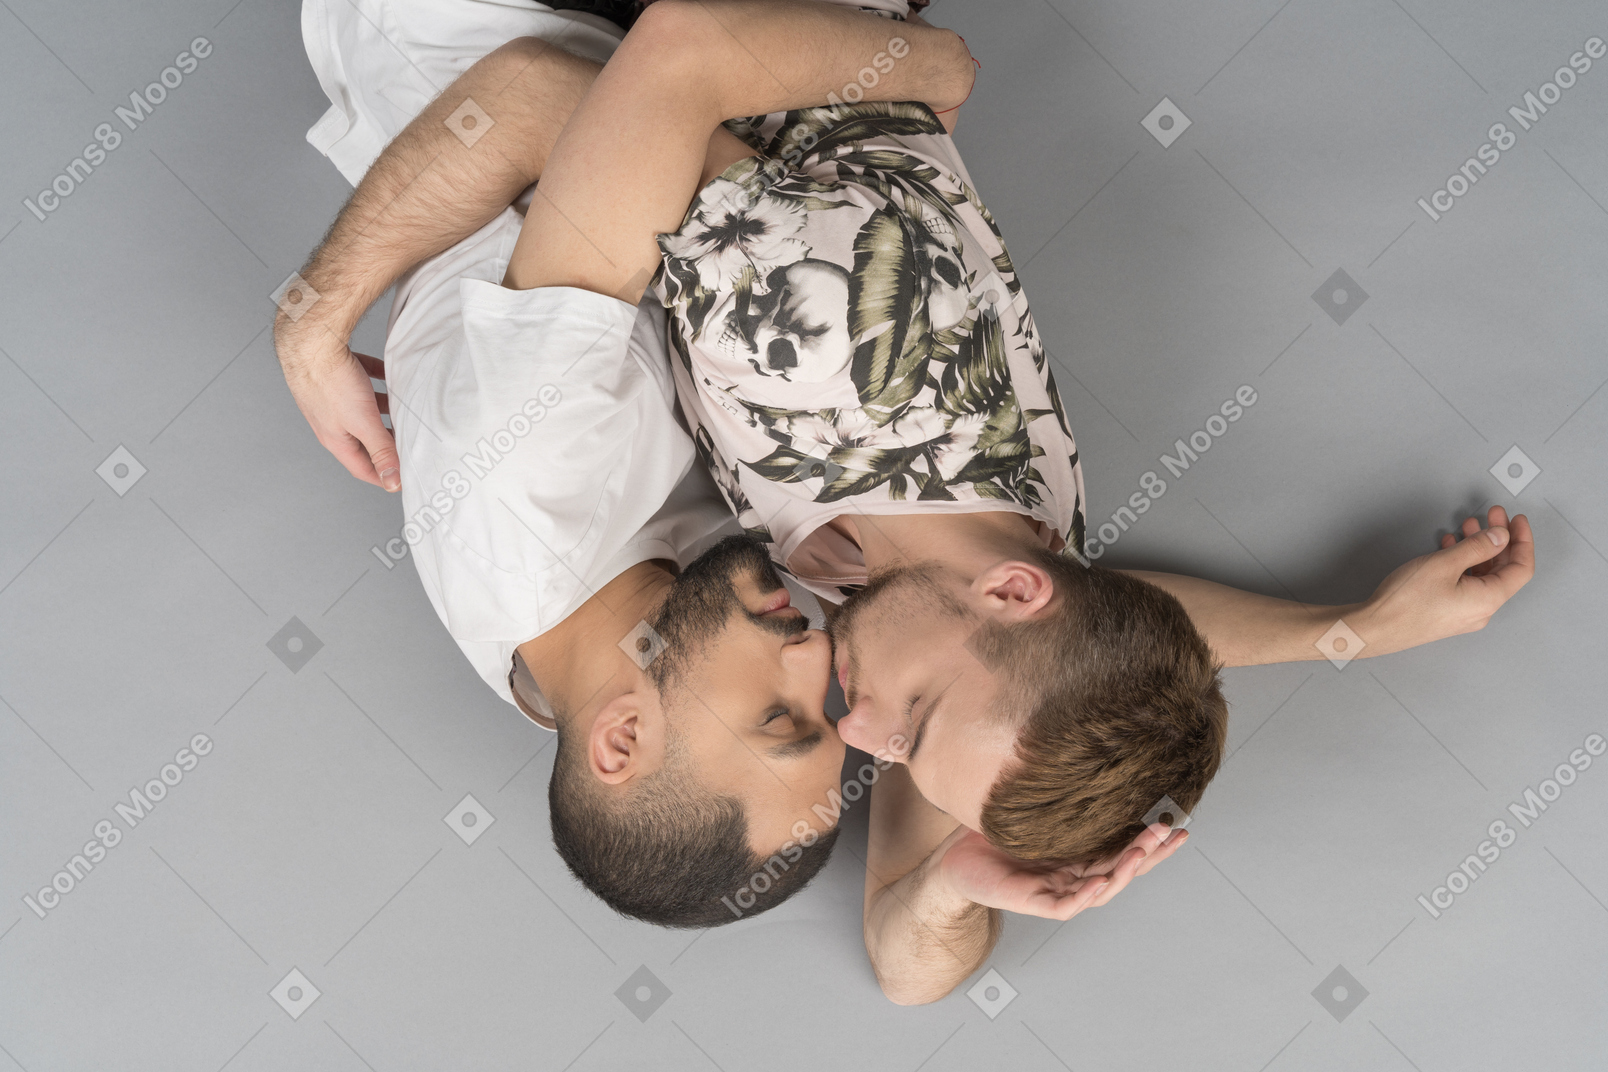 Flat lay of two young caucasian men lying on the floor hugging each other